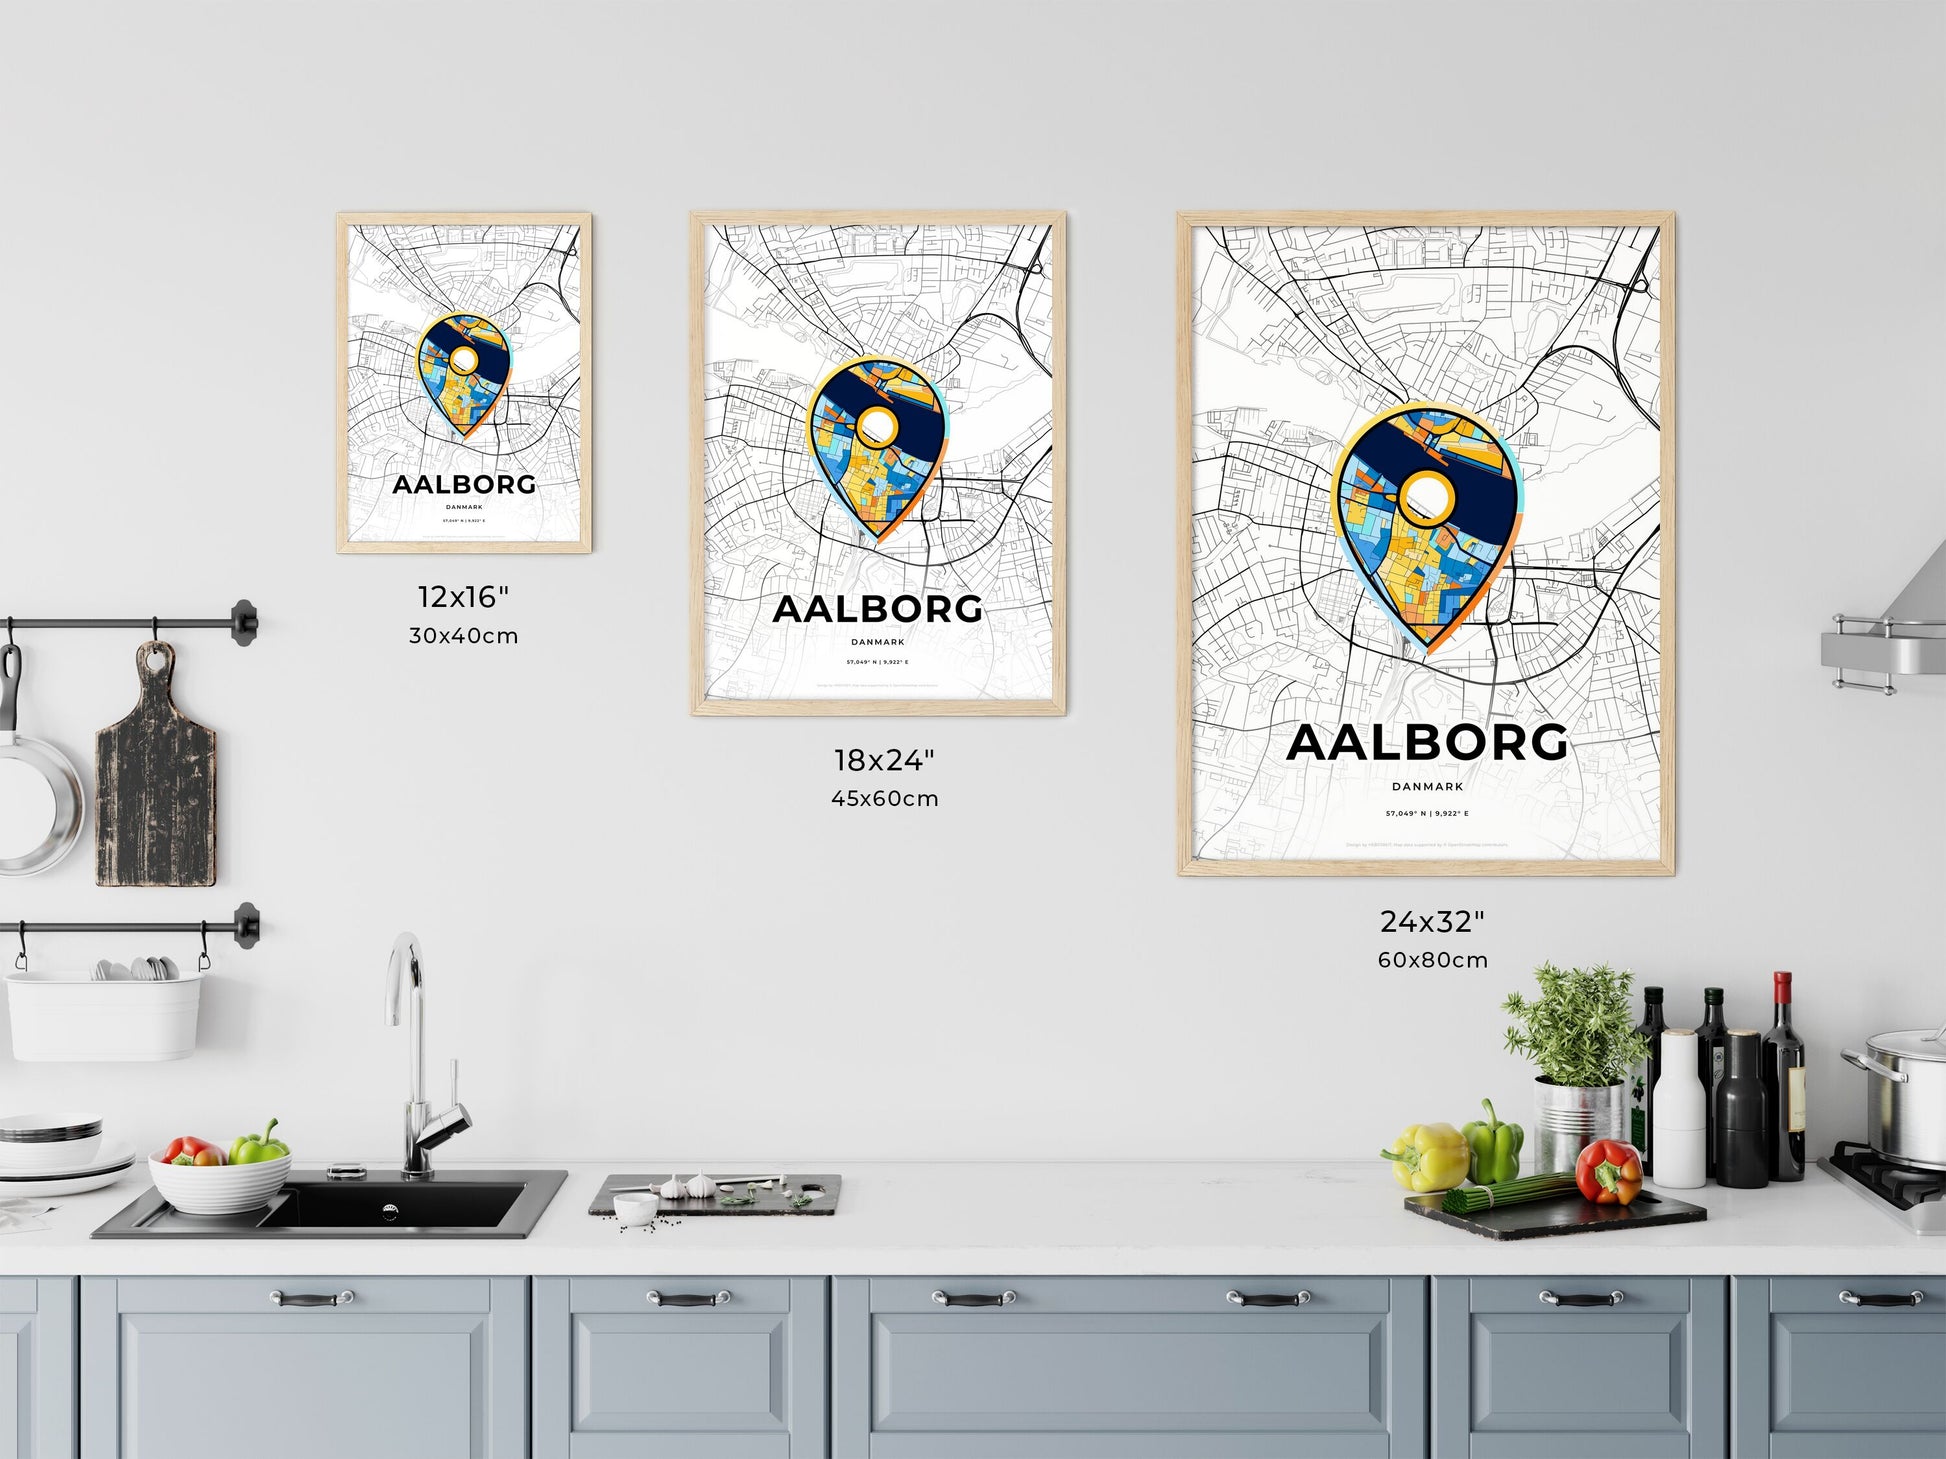 AALBORG DENMARK minimal art map with a colorful icon. Where it all began, Couple map gift.